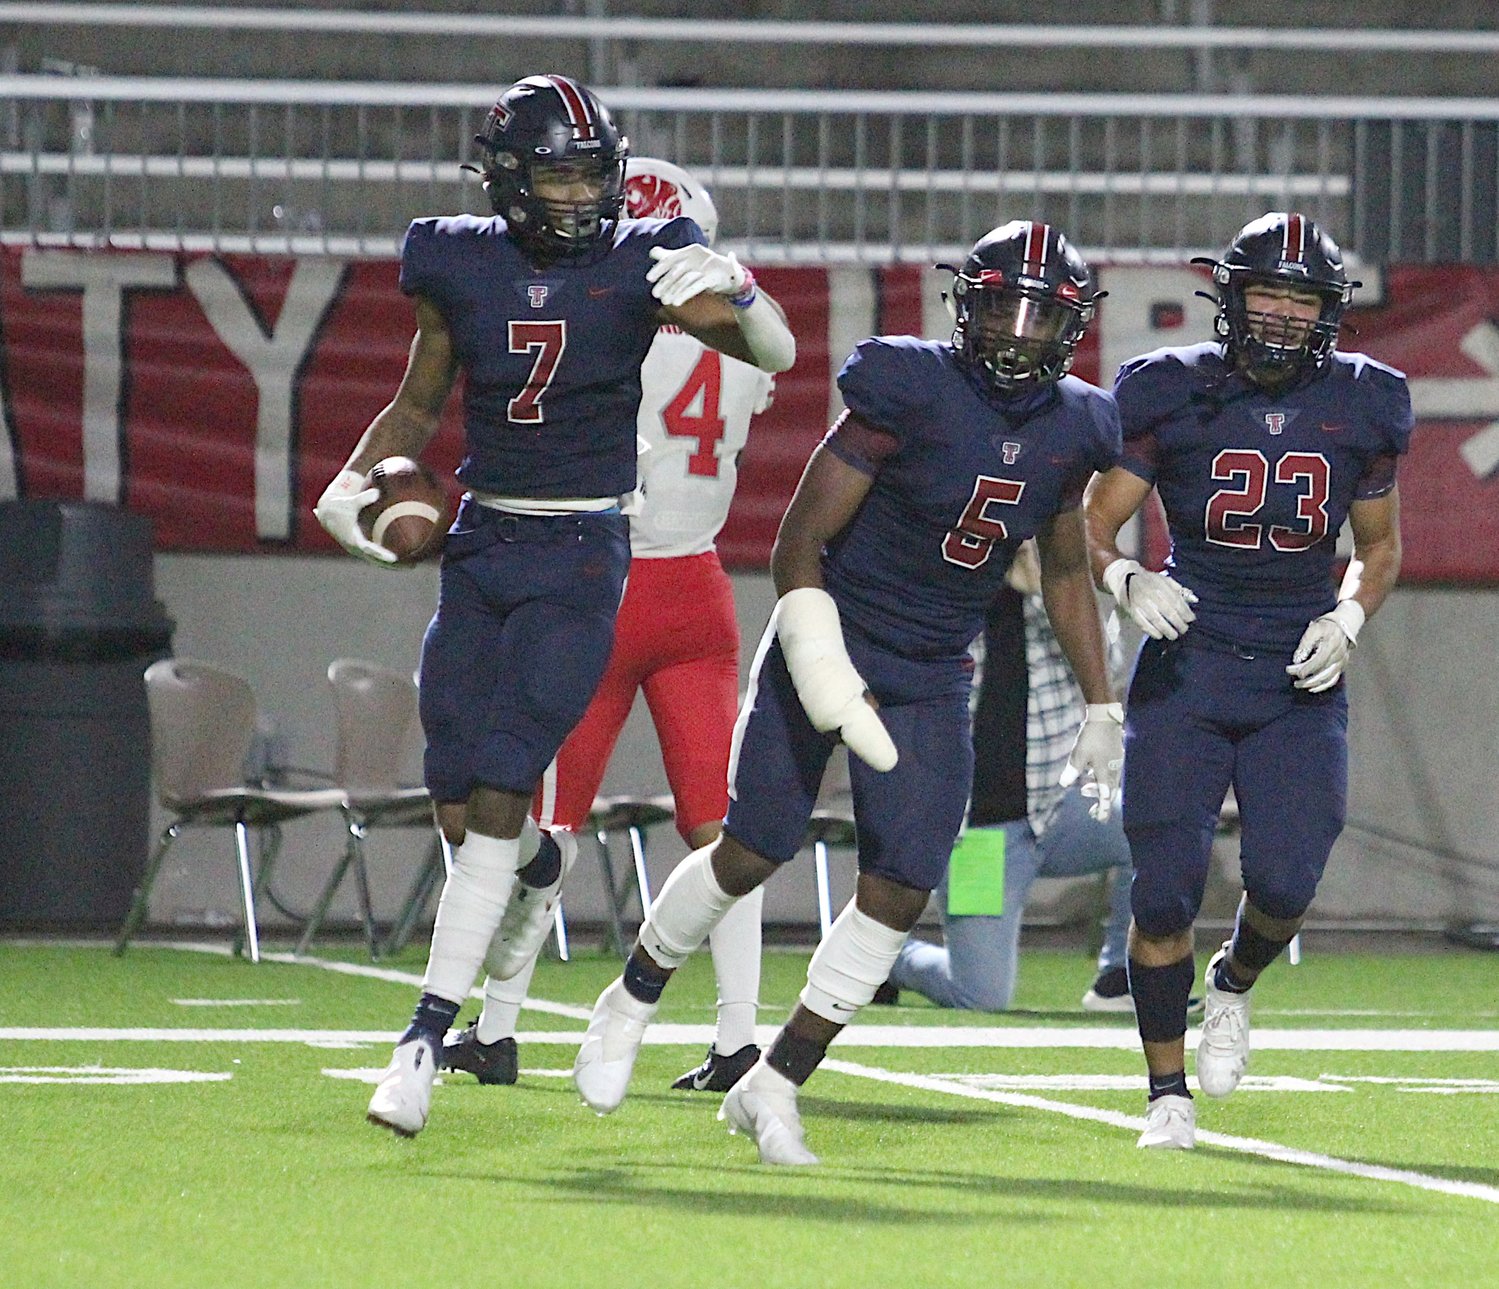 Senior defensive back Dru Polidore and the Tompkins Falcons are ranked No. 2 in this week's Houston area high school football media poll.